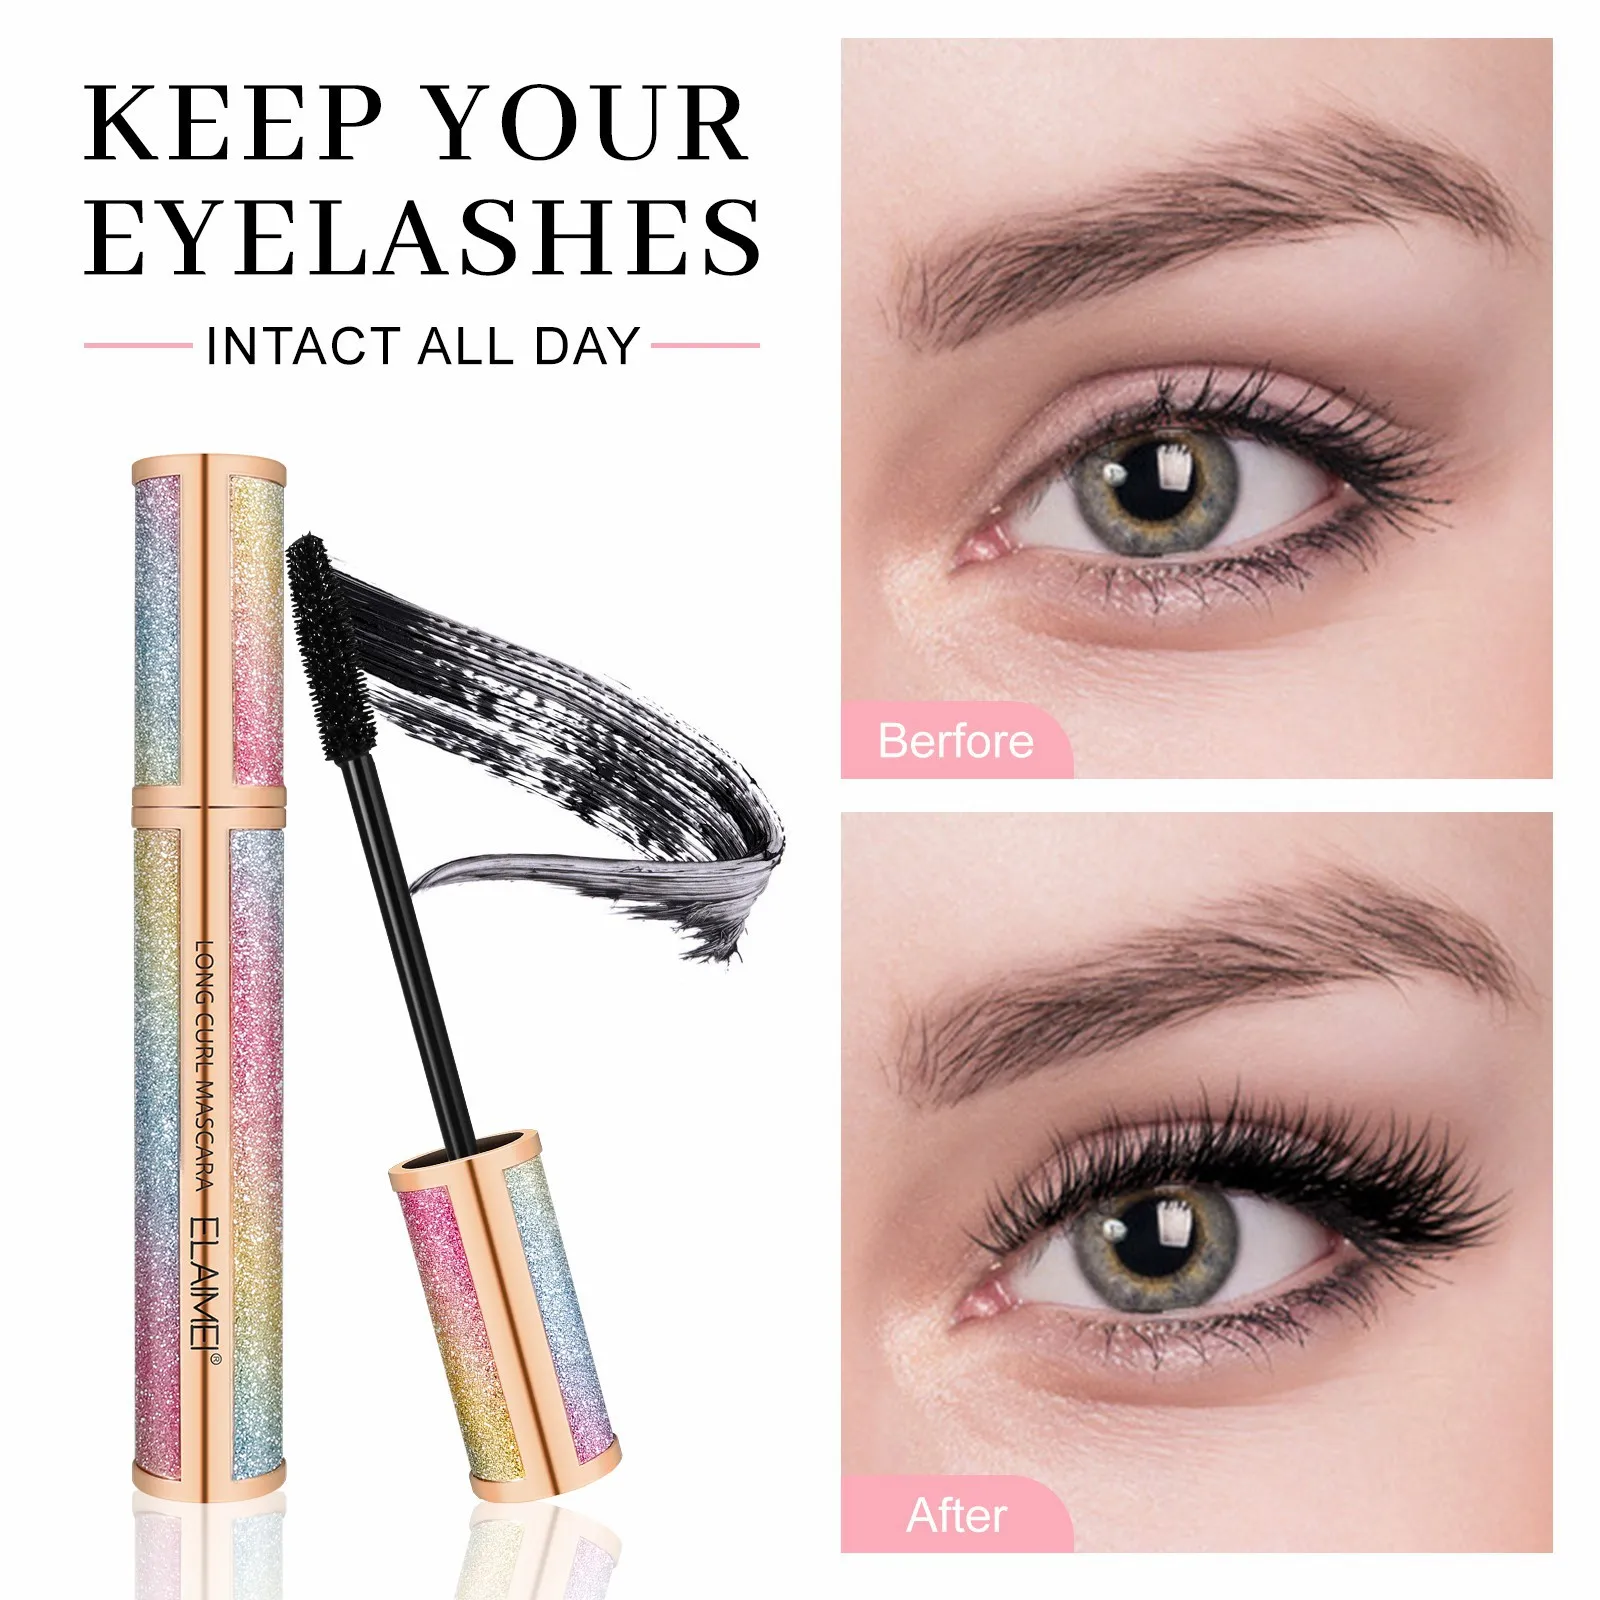 

Starry Sky Mascara Waterproof Thick Slender Curled Silicone Brush Head Instant Lengther Curly Eyelashe Styling Makeup Not Smudge